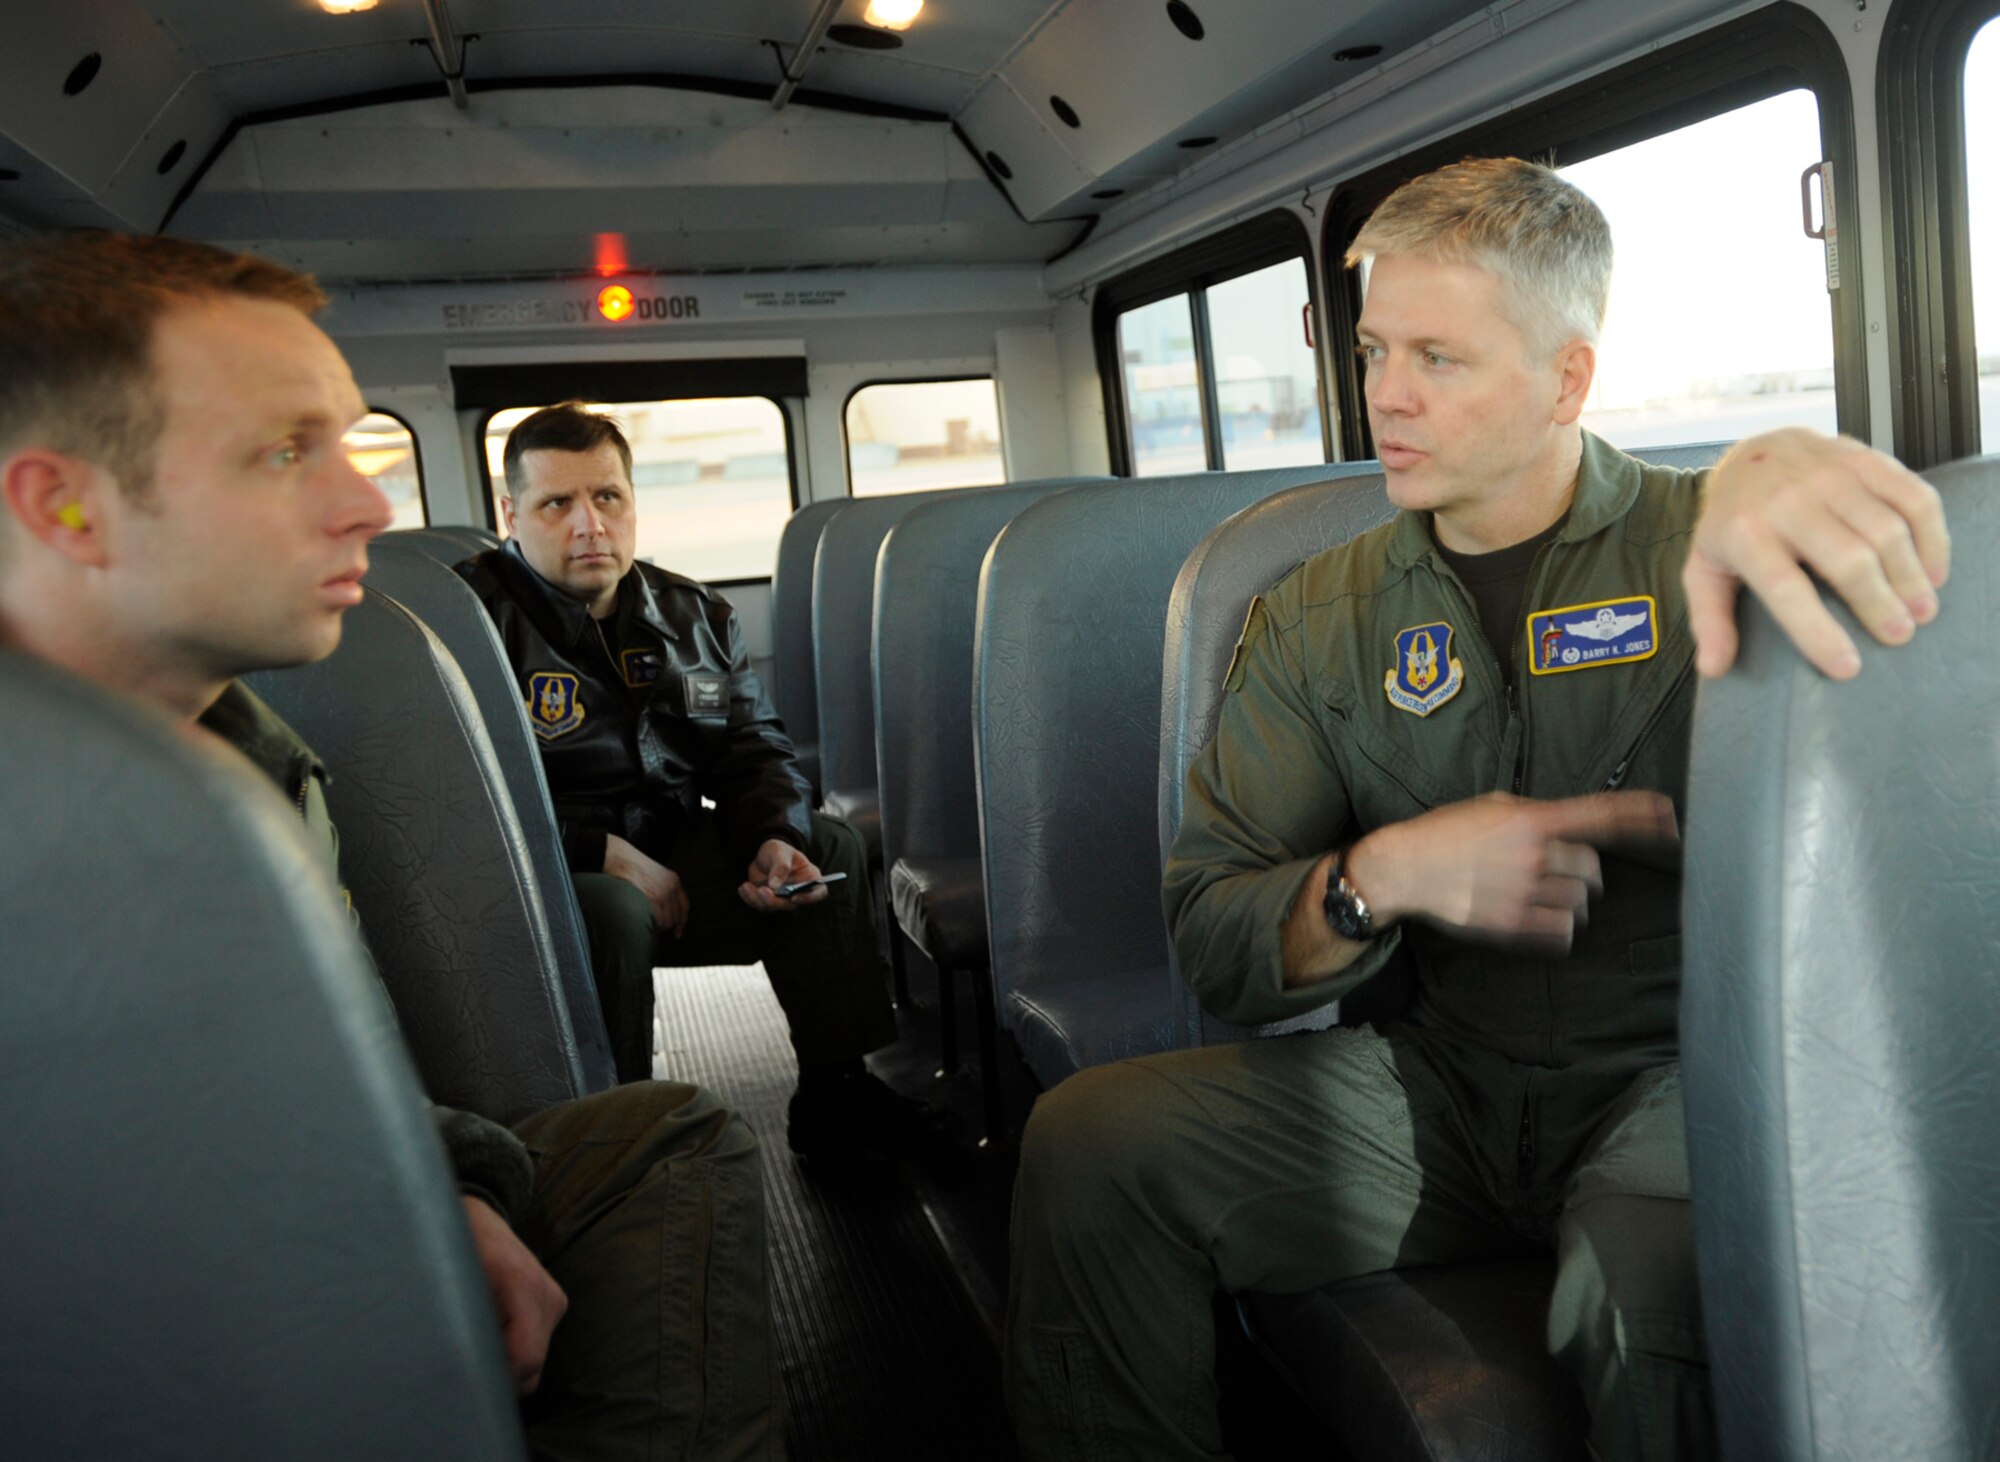 Lt. Col. Barry Jones talks with Capt. Keith "Kip" Anderson (far left) and Tech. Sgt. Kevin Bouchard during a bus ride to the flightline at McConnell Air Force Base, Kan. The three KC-135 Stratotanker crew members flew on an aerial refueling mission together in early January. Colonel Jones is a KC-135 pilot and commander of the 931st Operations Support Flight. Captain Anderson, also a pilot, and Sergeant Bouchard, KC-135 boom operator, are assigned to the 18th Air Refueling Squadron, the flying unit of the 931st Air Refueling Group. The 931st is an Air Force Reserve unit at McConnell. (U.S. Air Force photo/Tech. Sgt. Jason Schaap)    